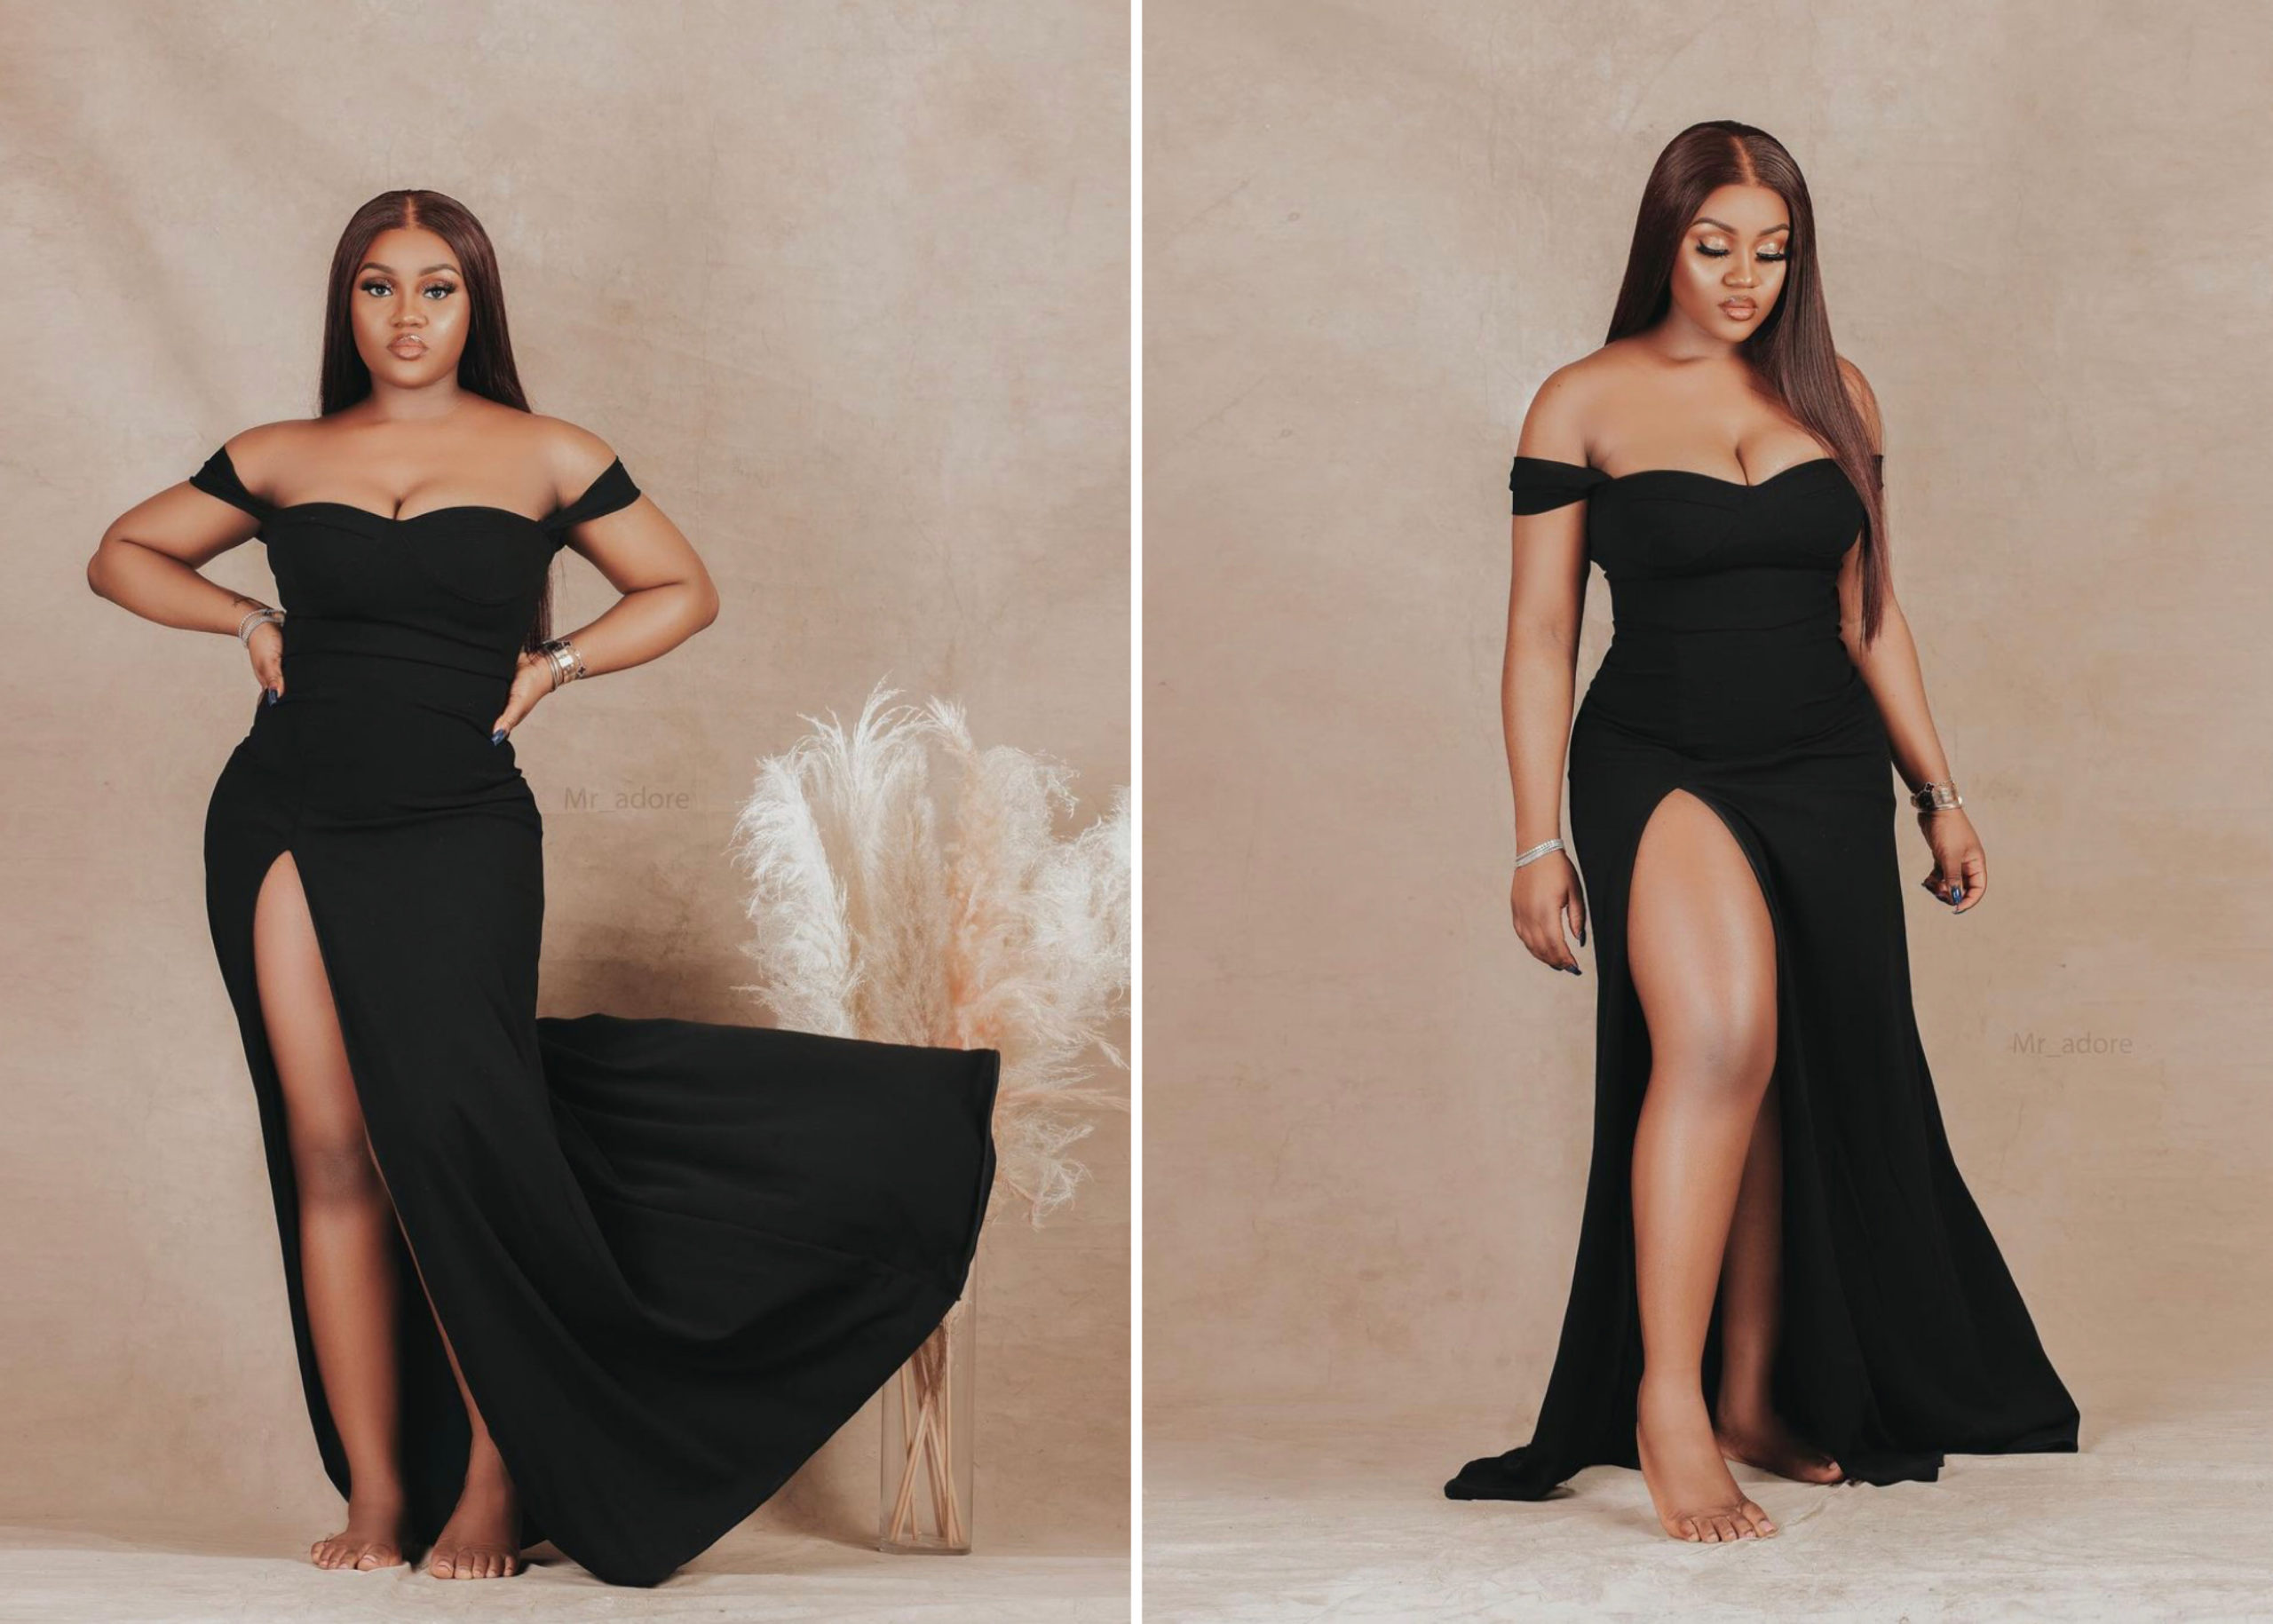 Chioma Rowland Releases Stunning Photos To Celebrate 26th Birthday